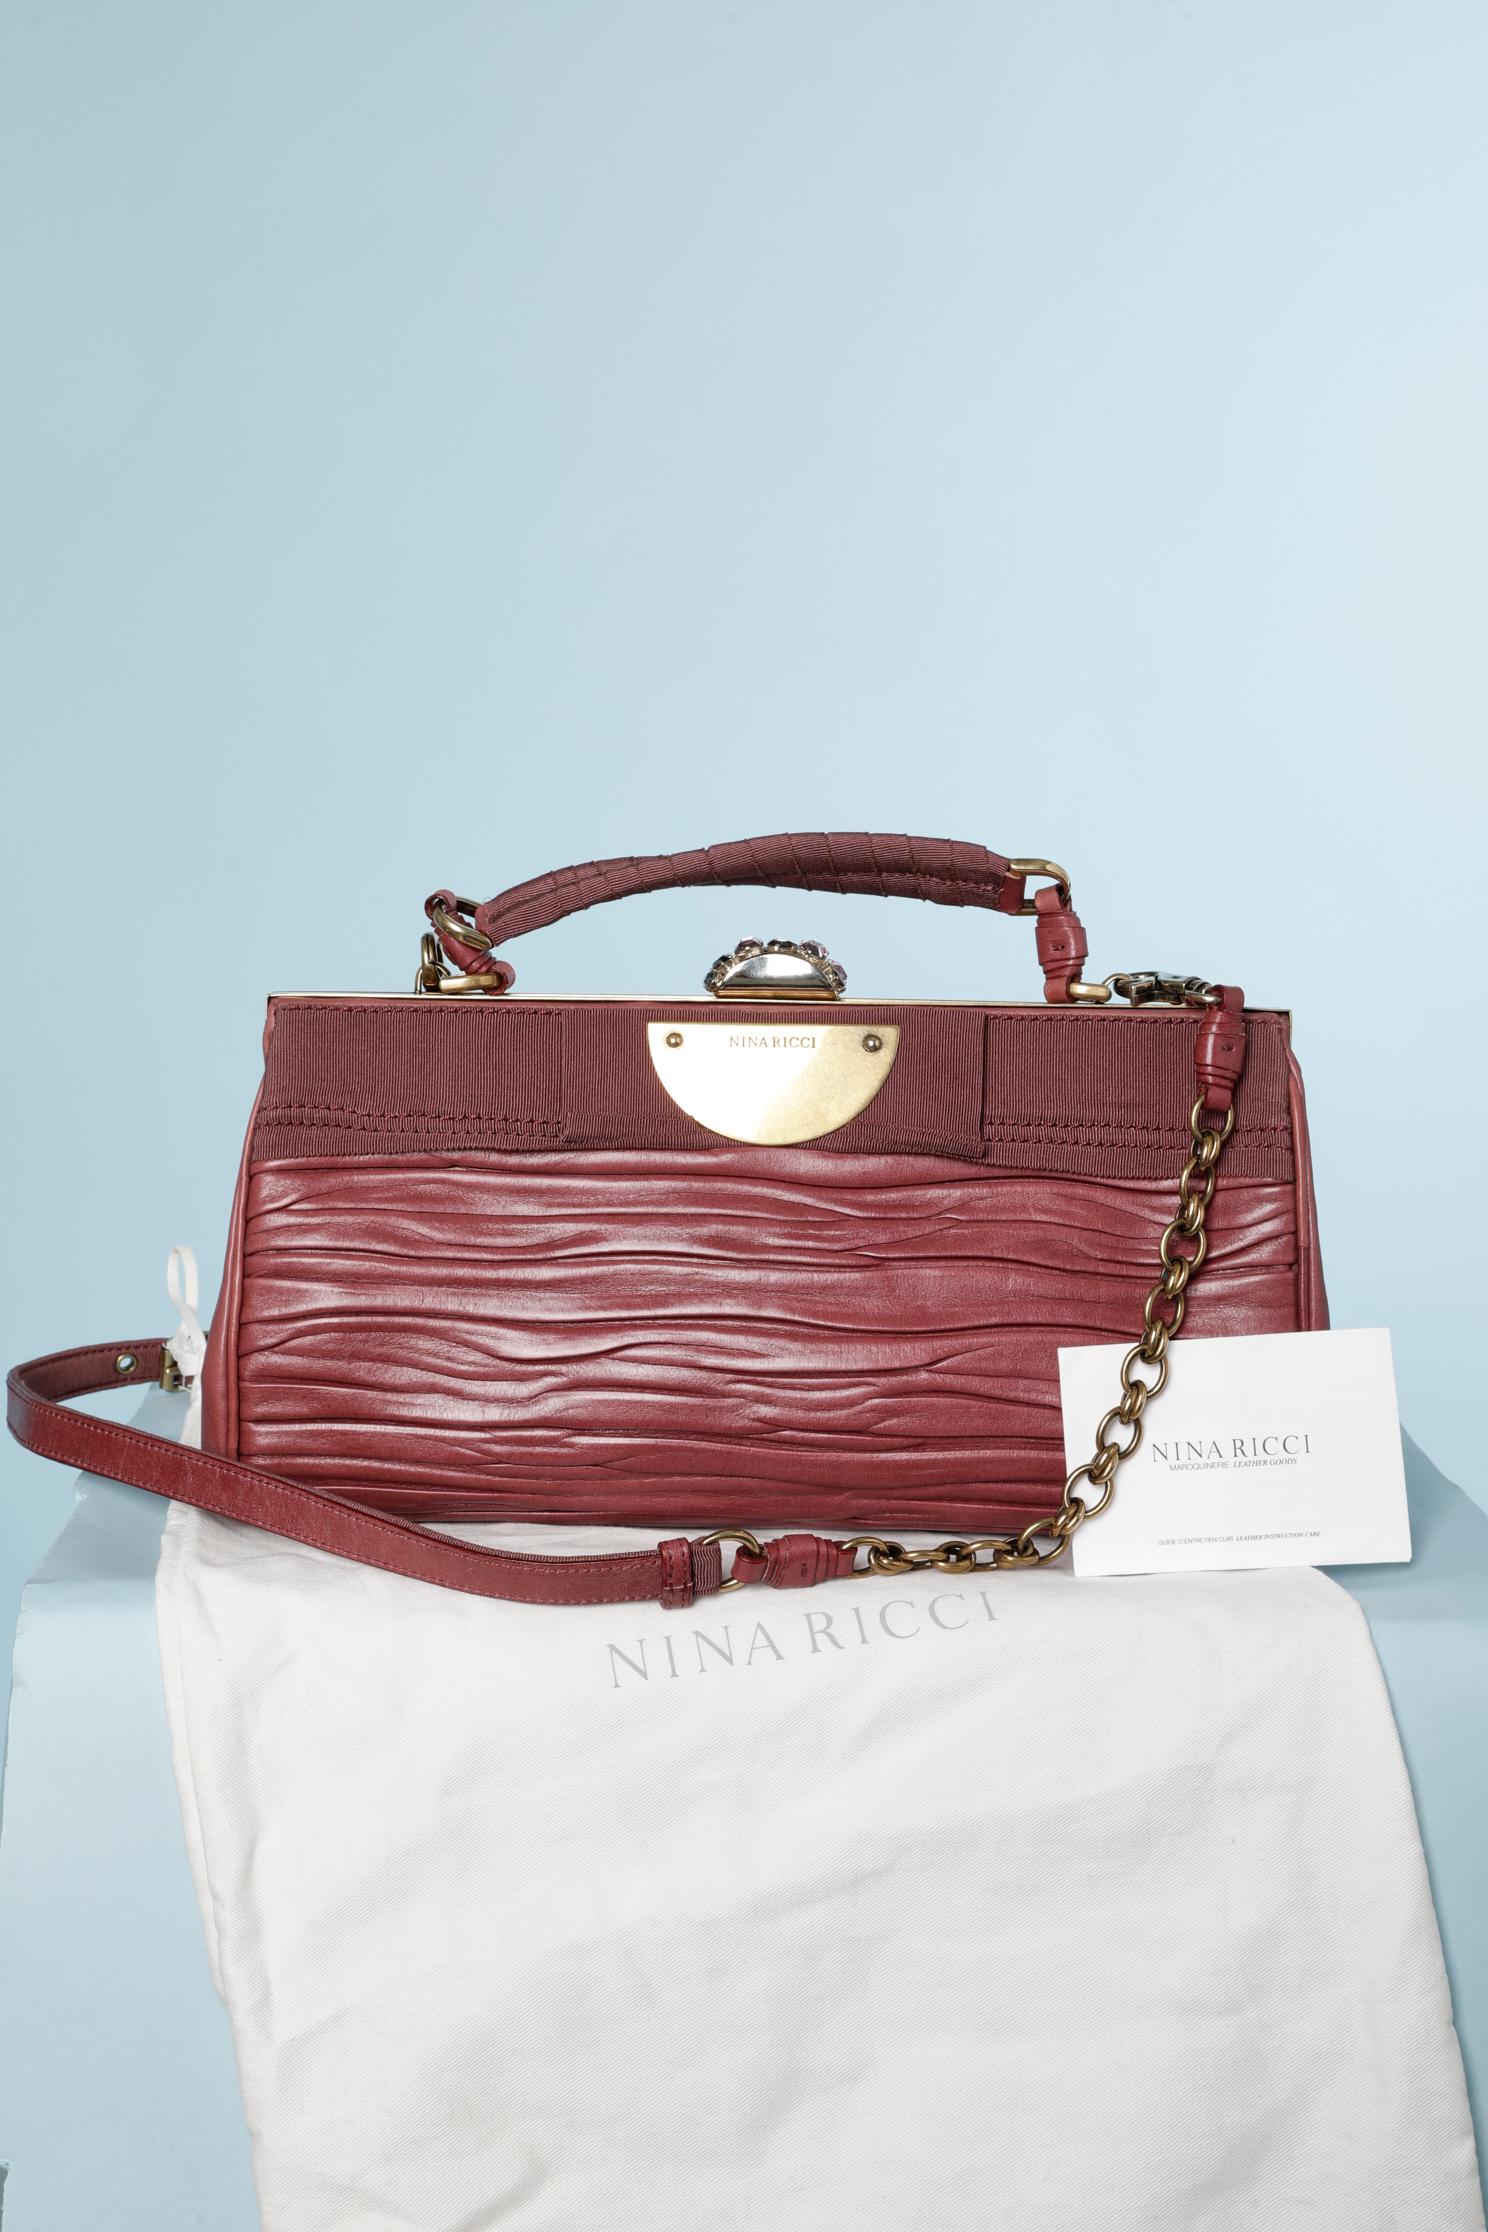 Rose wood color pleated leather and gros-grain shoulder bag Nina Ricci  In Excellent Condition For Sale In Saint-Ouen-Sur-Seine, FR